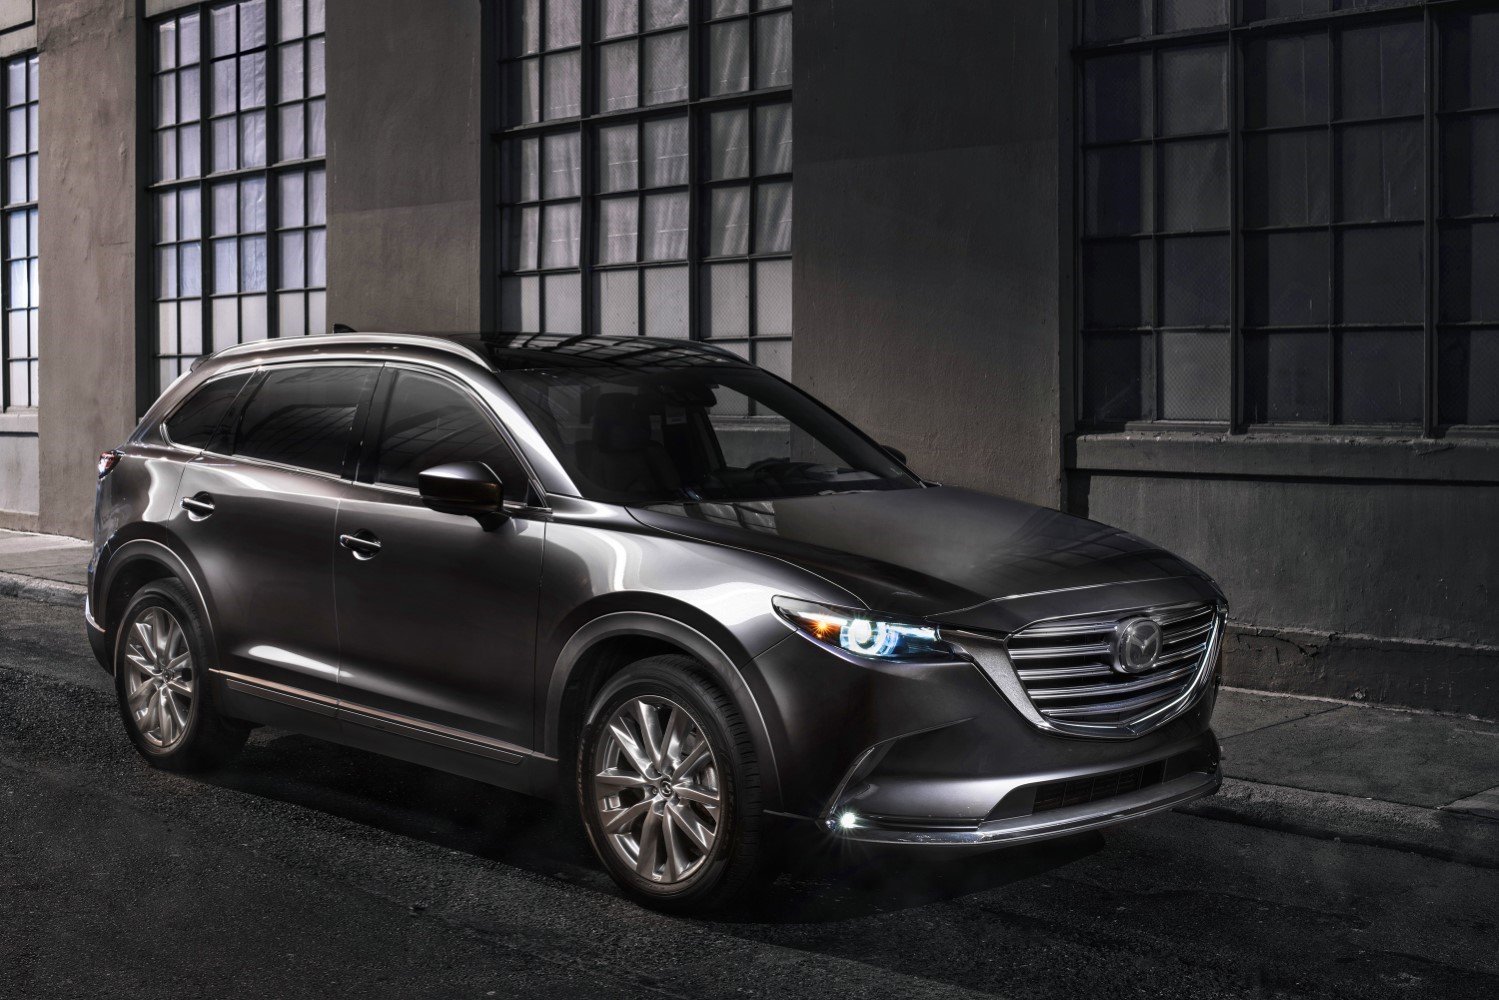 2018 Mazda CX9 SUV Specs, Review, and Pricing CarSession